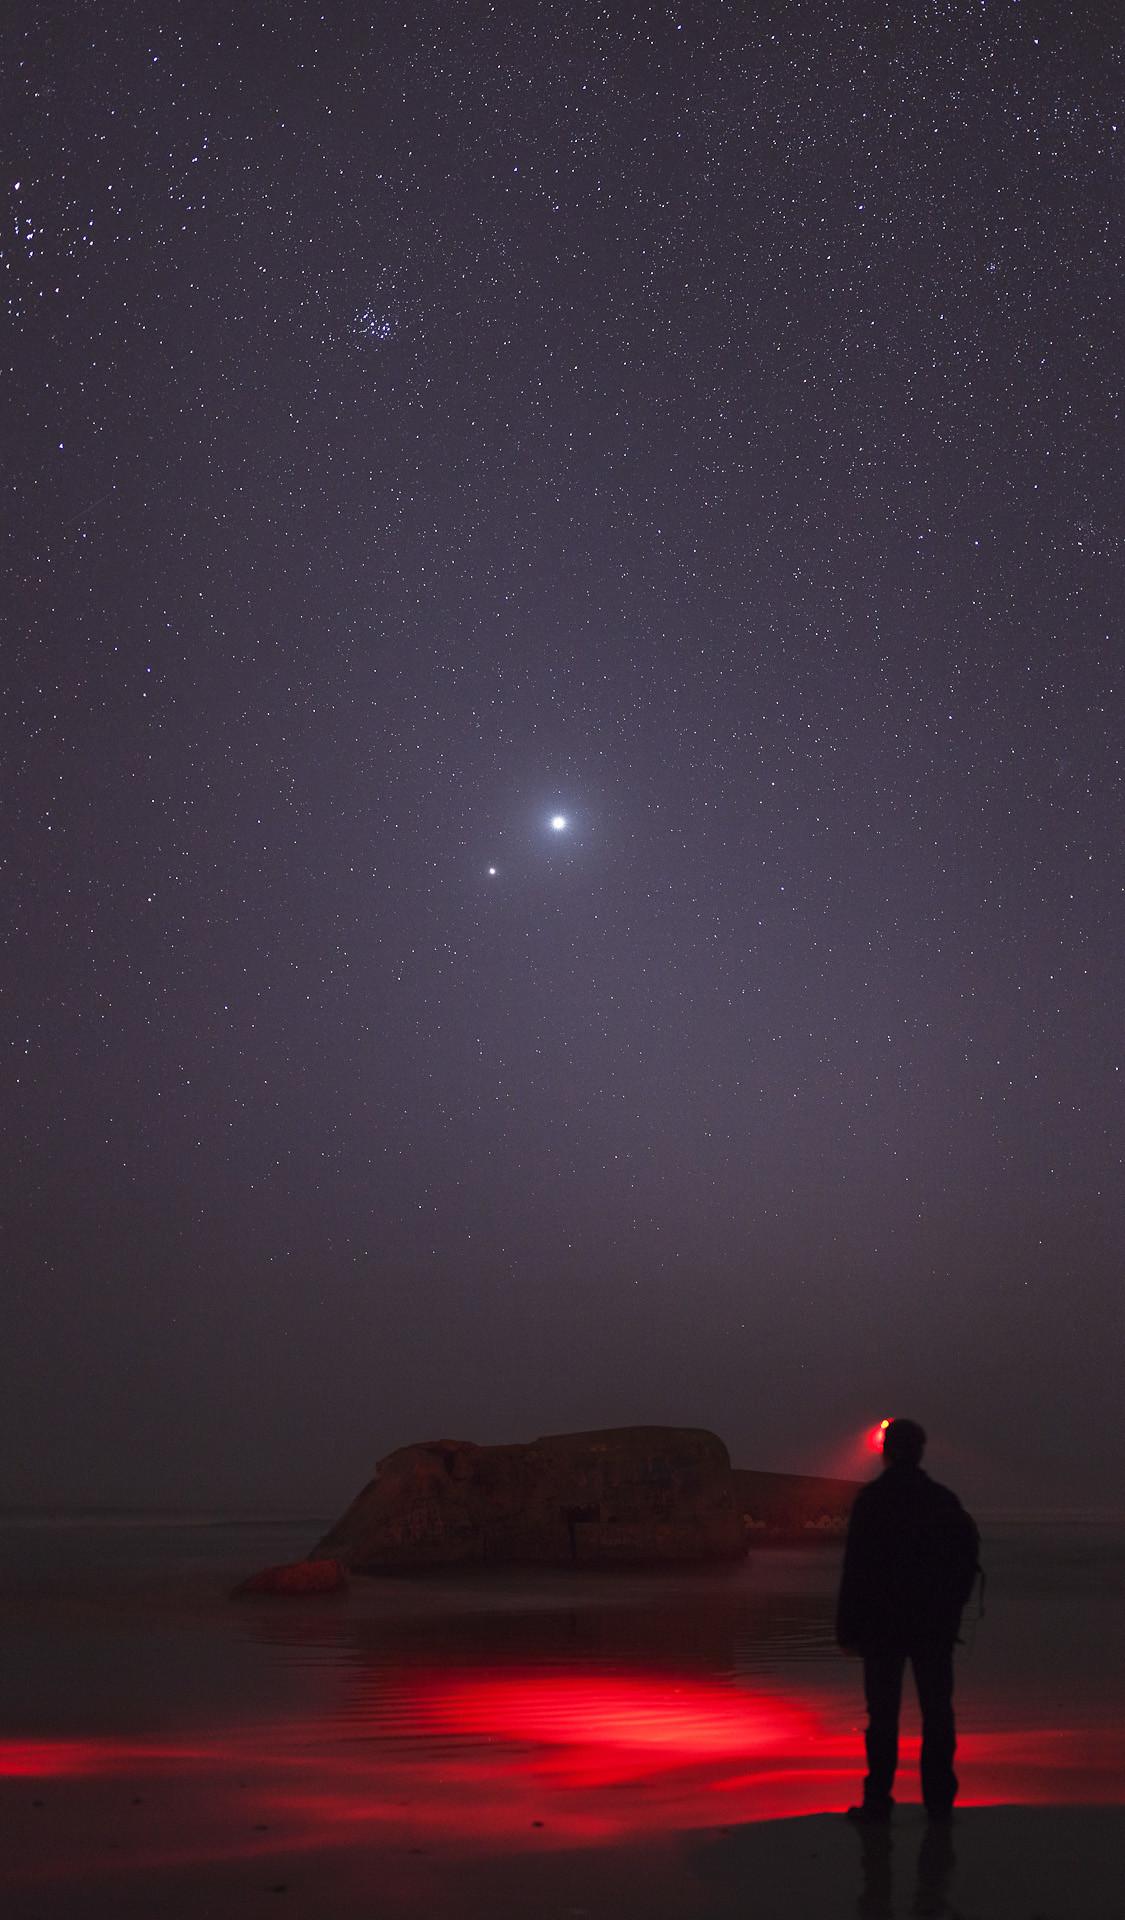 Image of man standing looking at night sky, which has two bright lights close together which are Venus and Jupiter